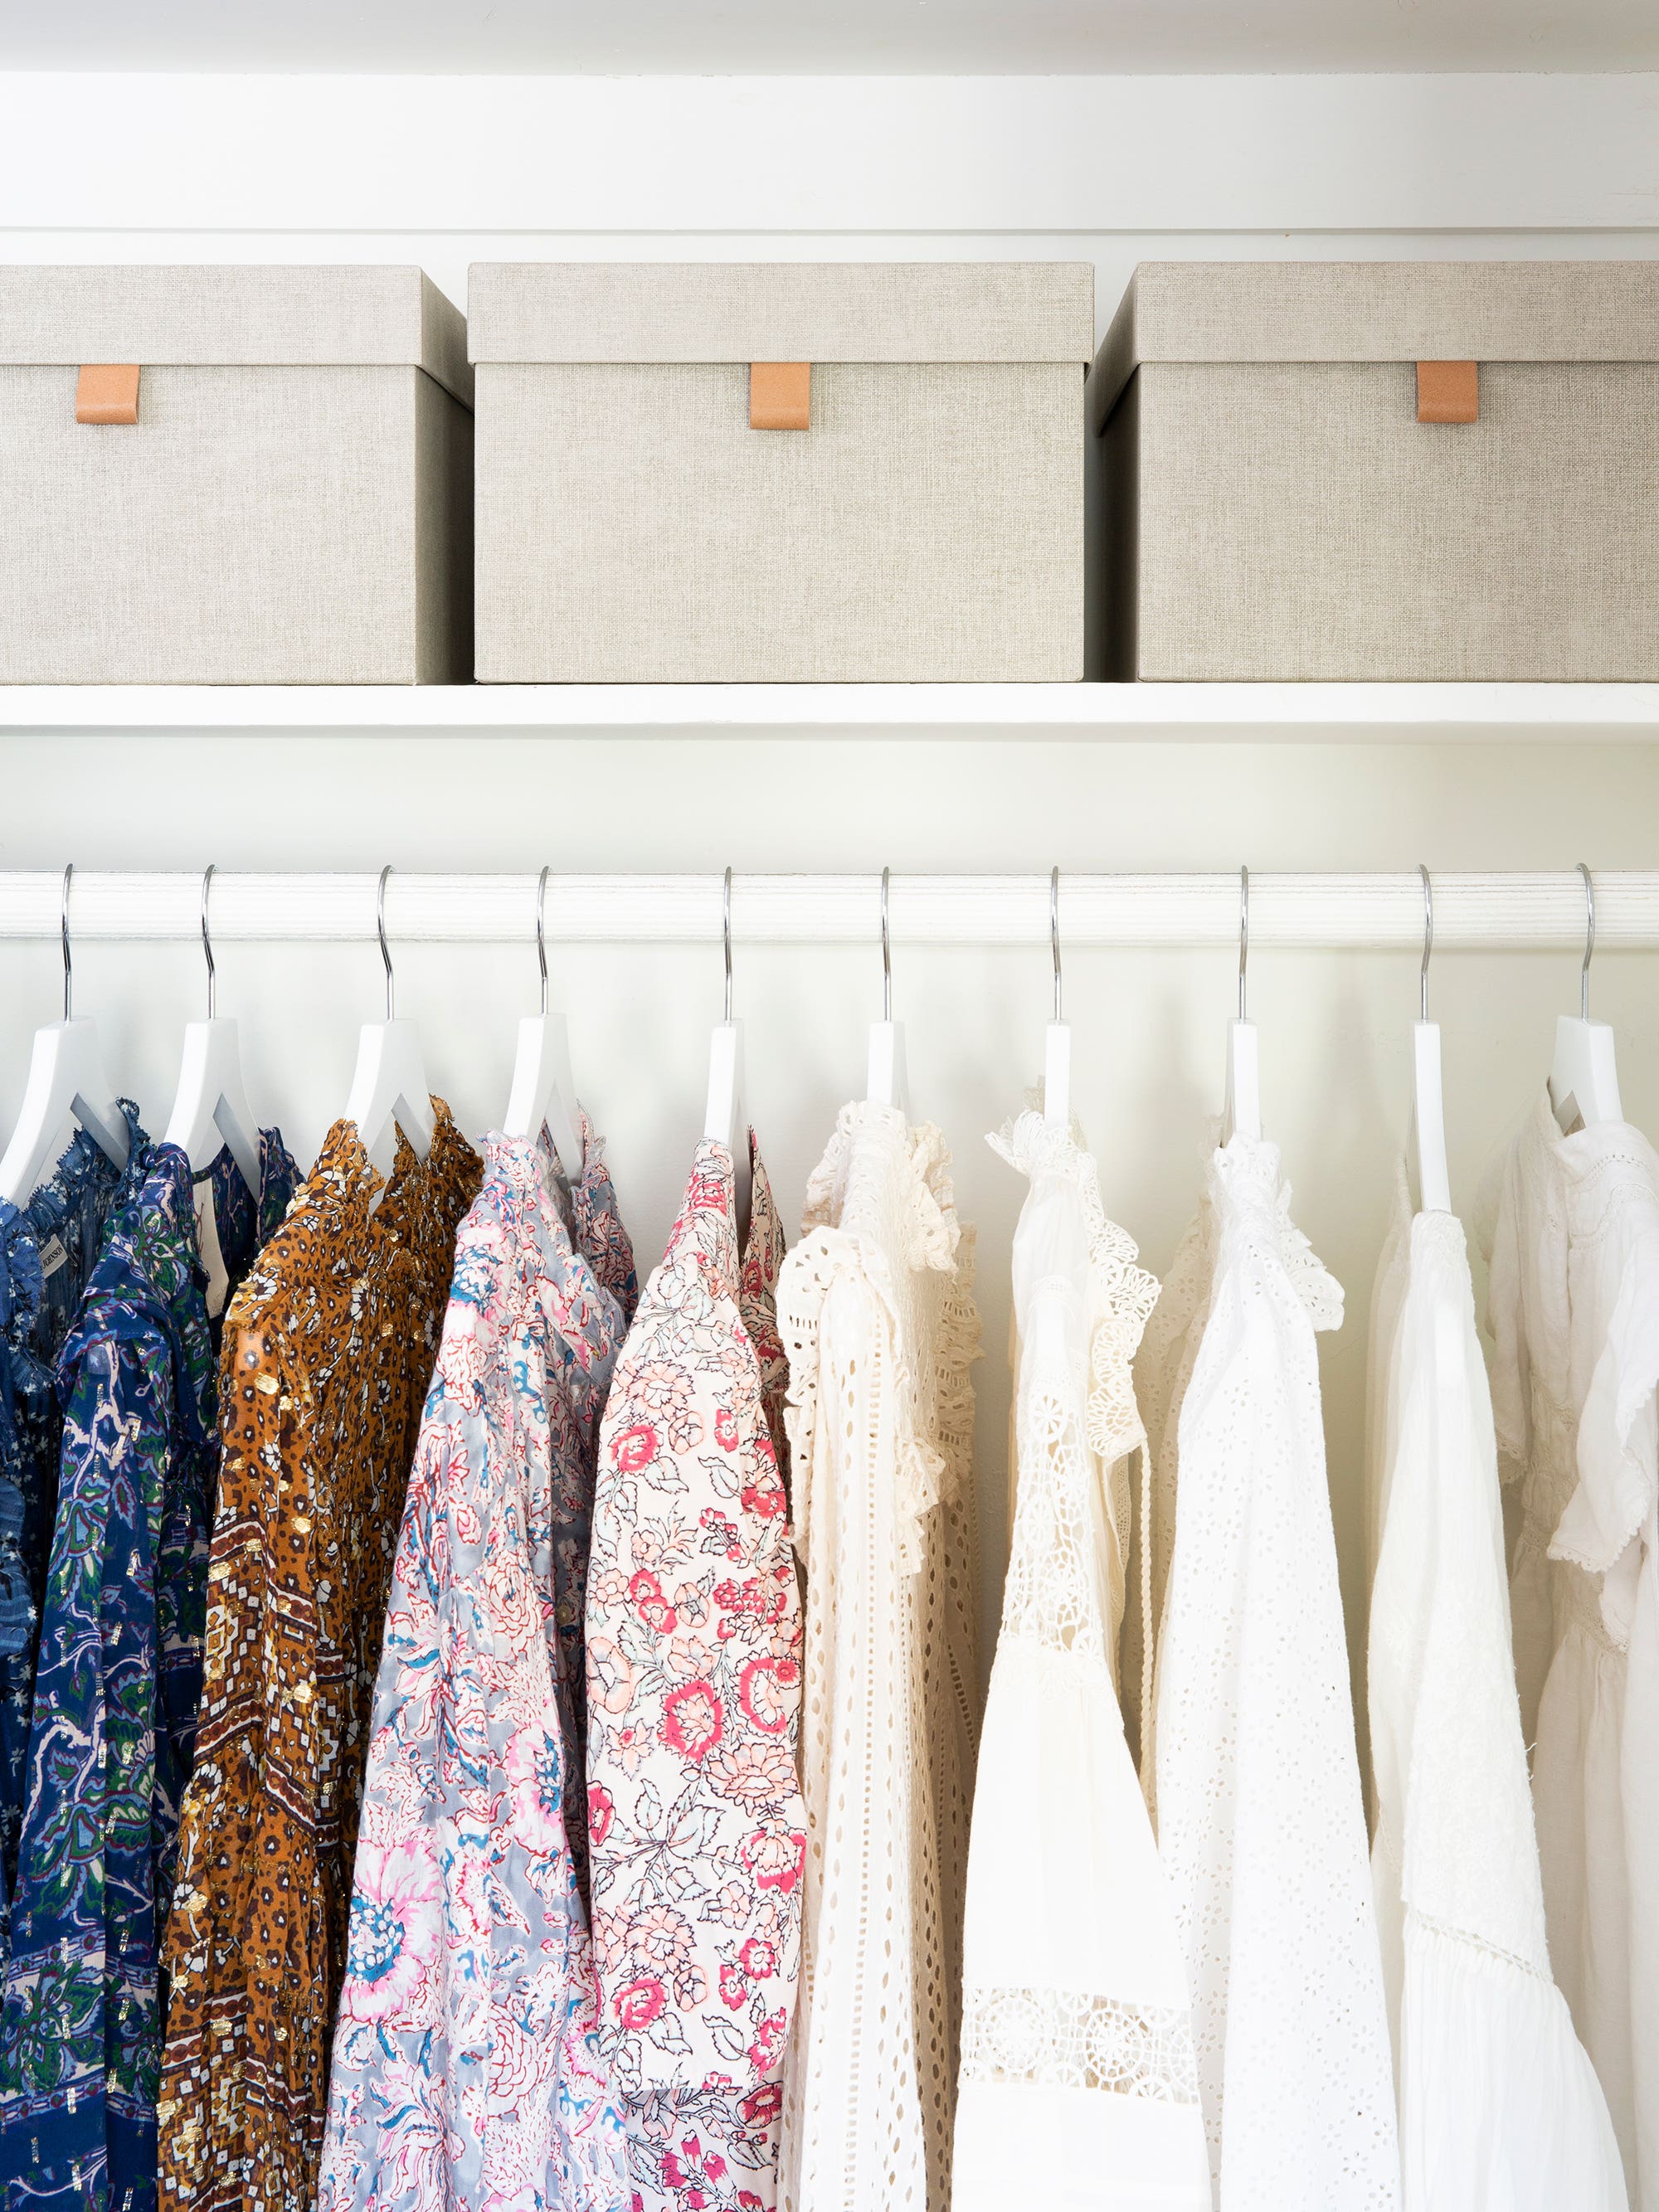 How to Reorganize Your Closet—Without Using Any Plastic